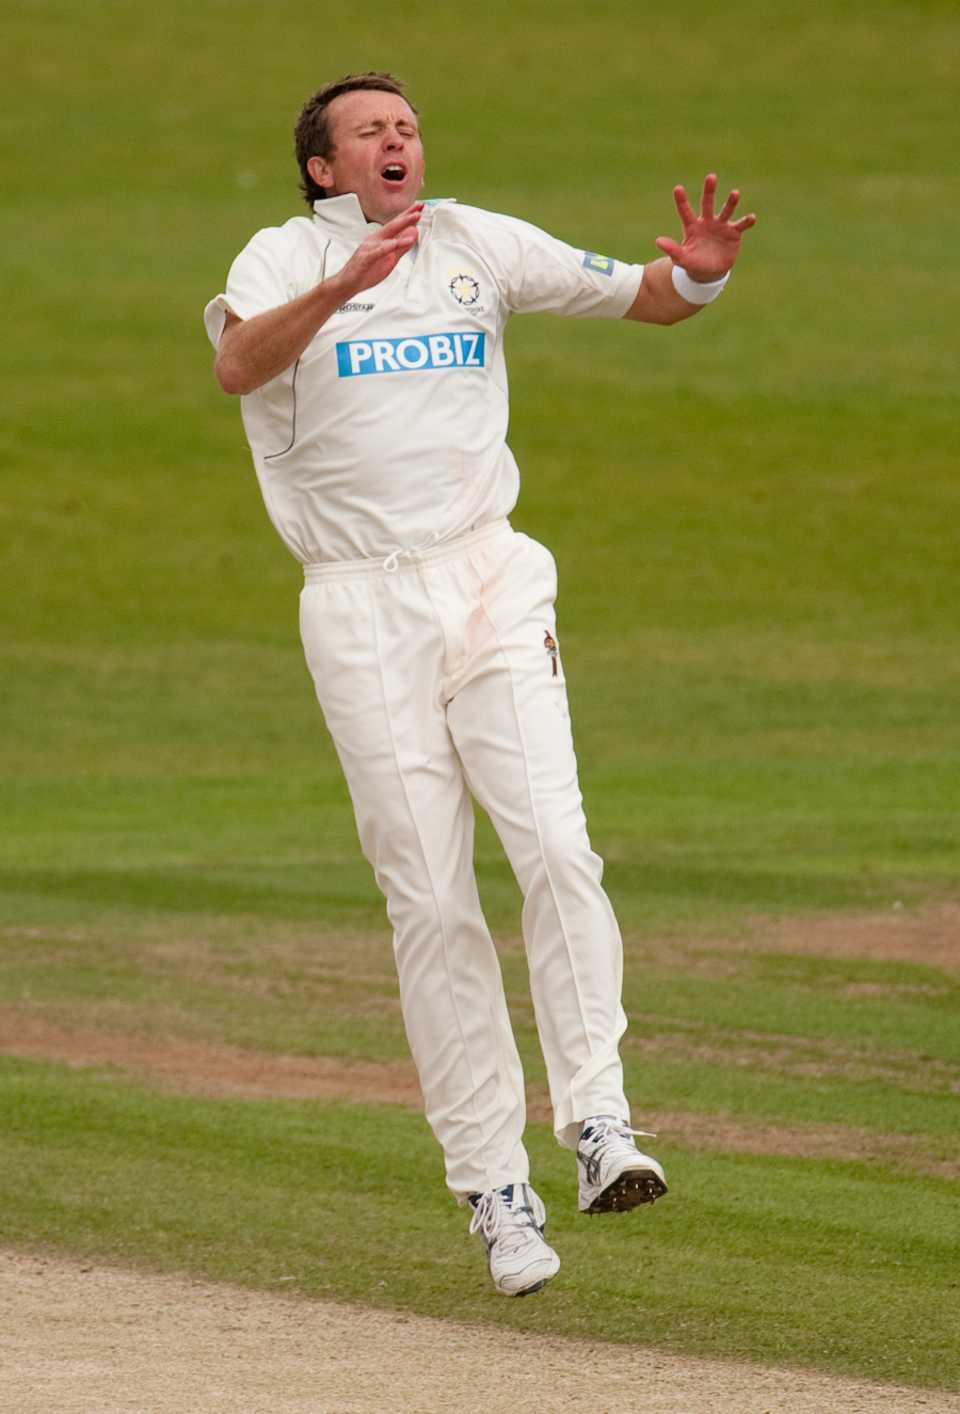 Dominic Cork reacts to a near miss against Yorkshire